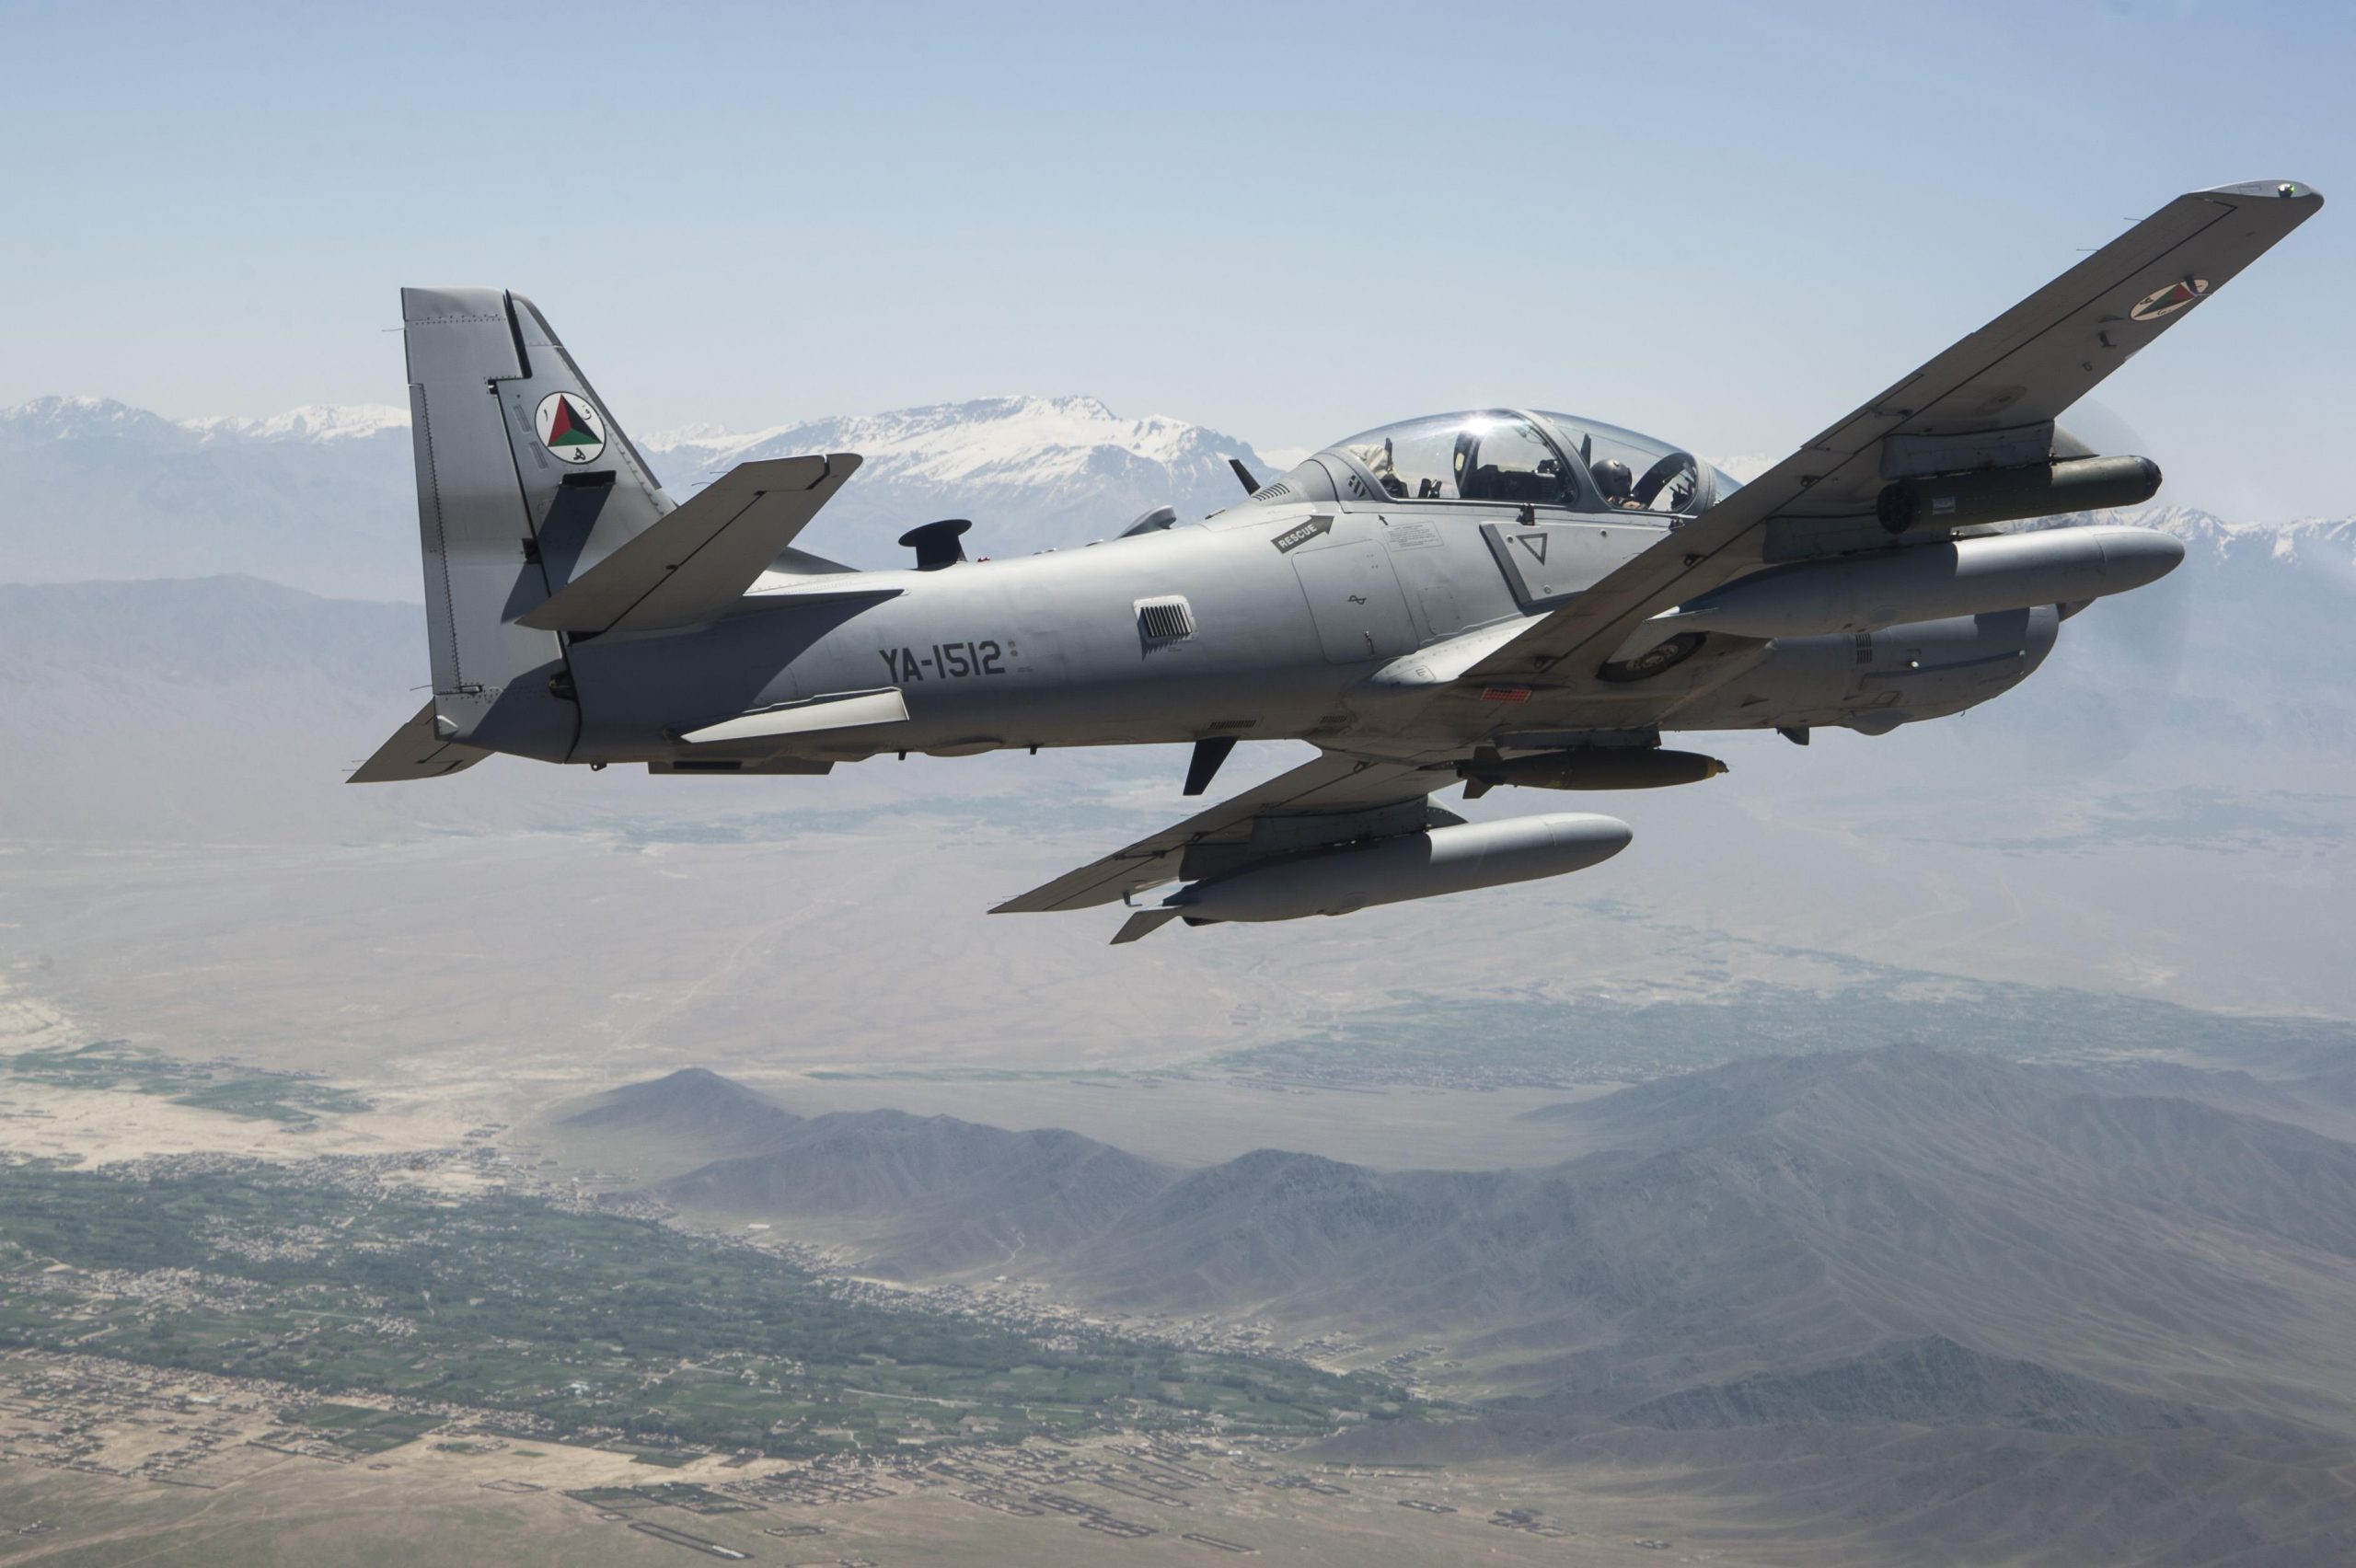 Defense Secretary Jim Mattis spoke by telephone with President Ashraf Ghani of Afghanistan to discuss the enduring U.S.-Afghan security relationship, Feb. 7, 2017. Pictured here, an Afghan air force A-29 Super Tucano flies over Kabul, Afghanistan, April 28, 2016. The highest priority skill set for the Afghan pilots is close air support. Pilots are trained to employ rockets, precision-guided bombs, general purpose bombs and strafing in support of ground troops. Air Force photo by Staff Sgt. Larry Reid Jr. -